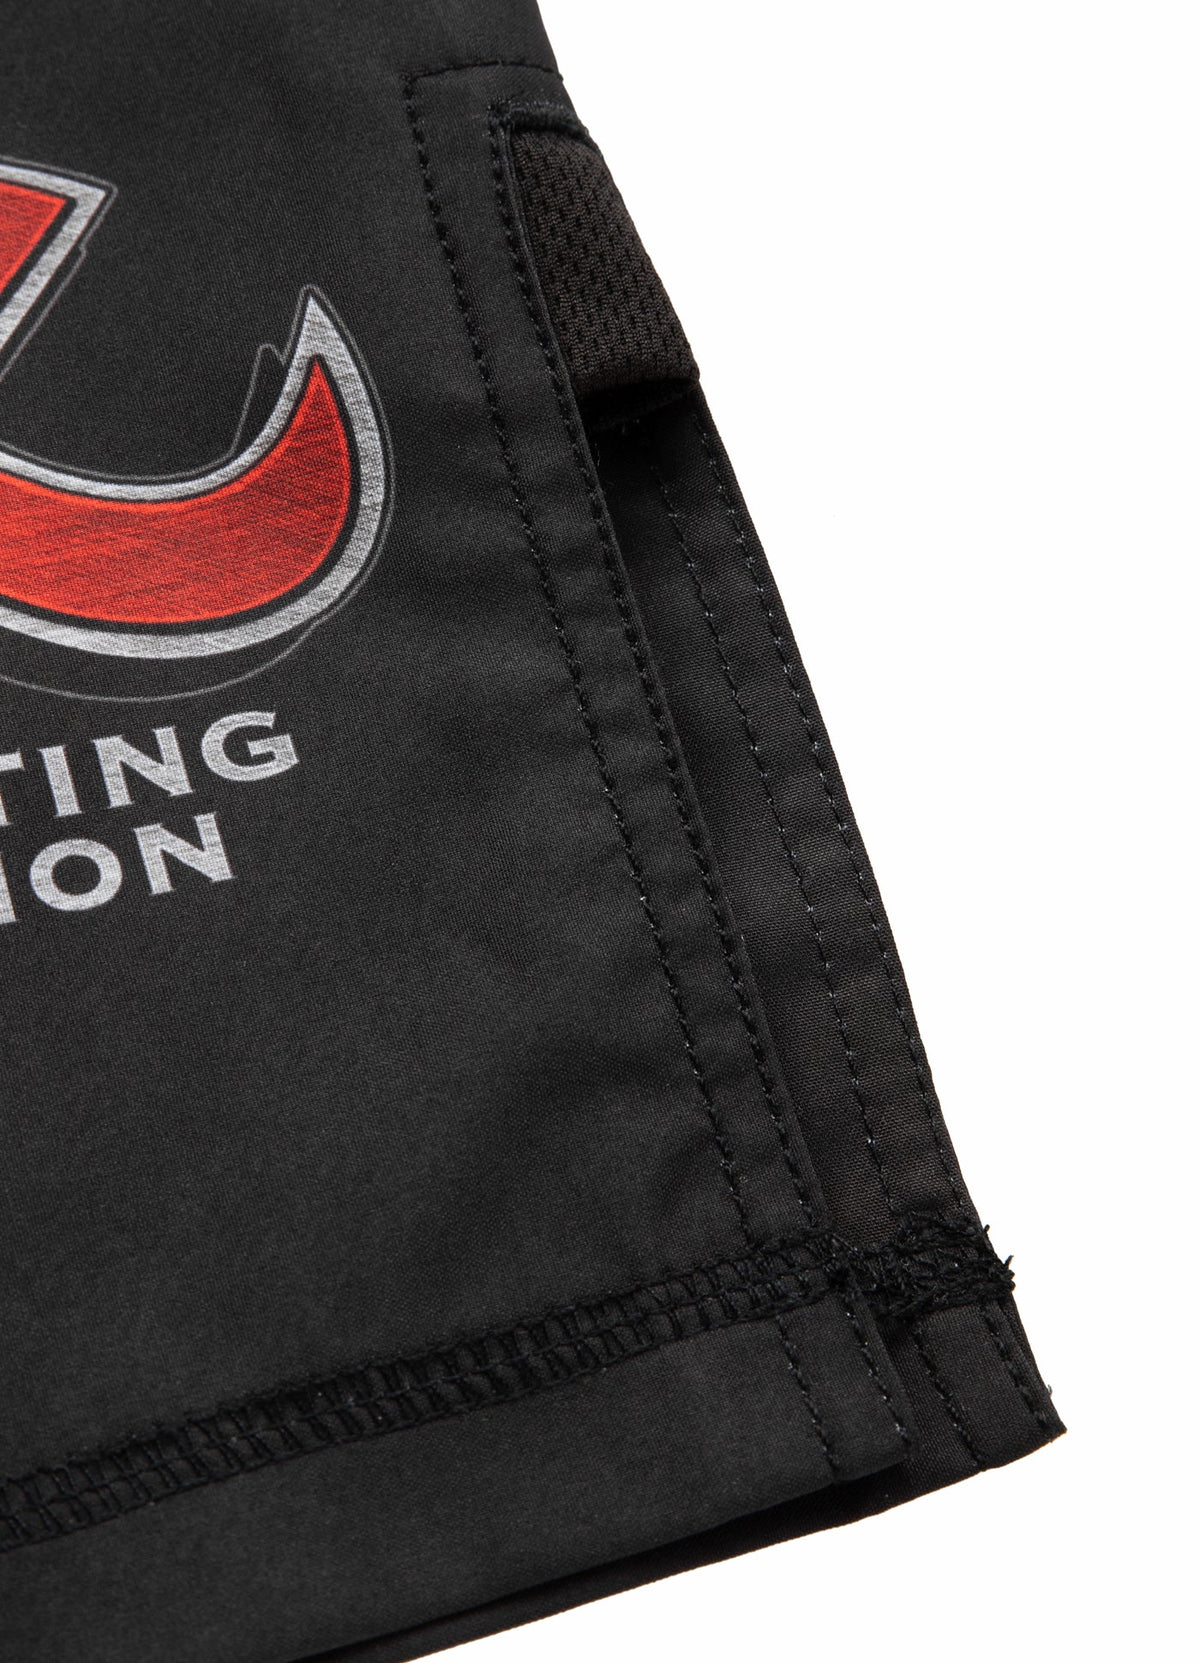 ADCC Black Fight Shorts